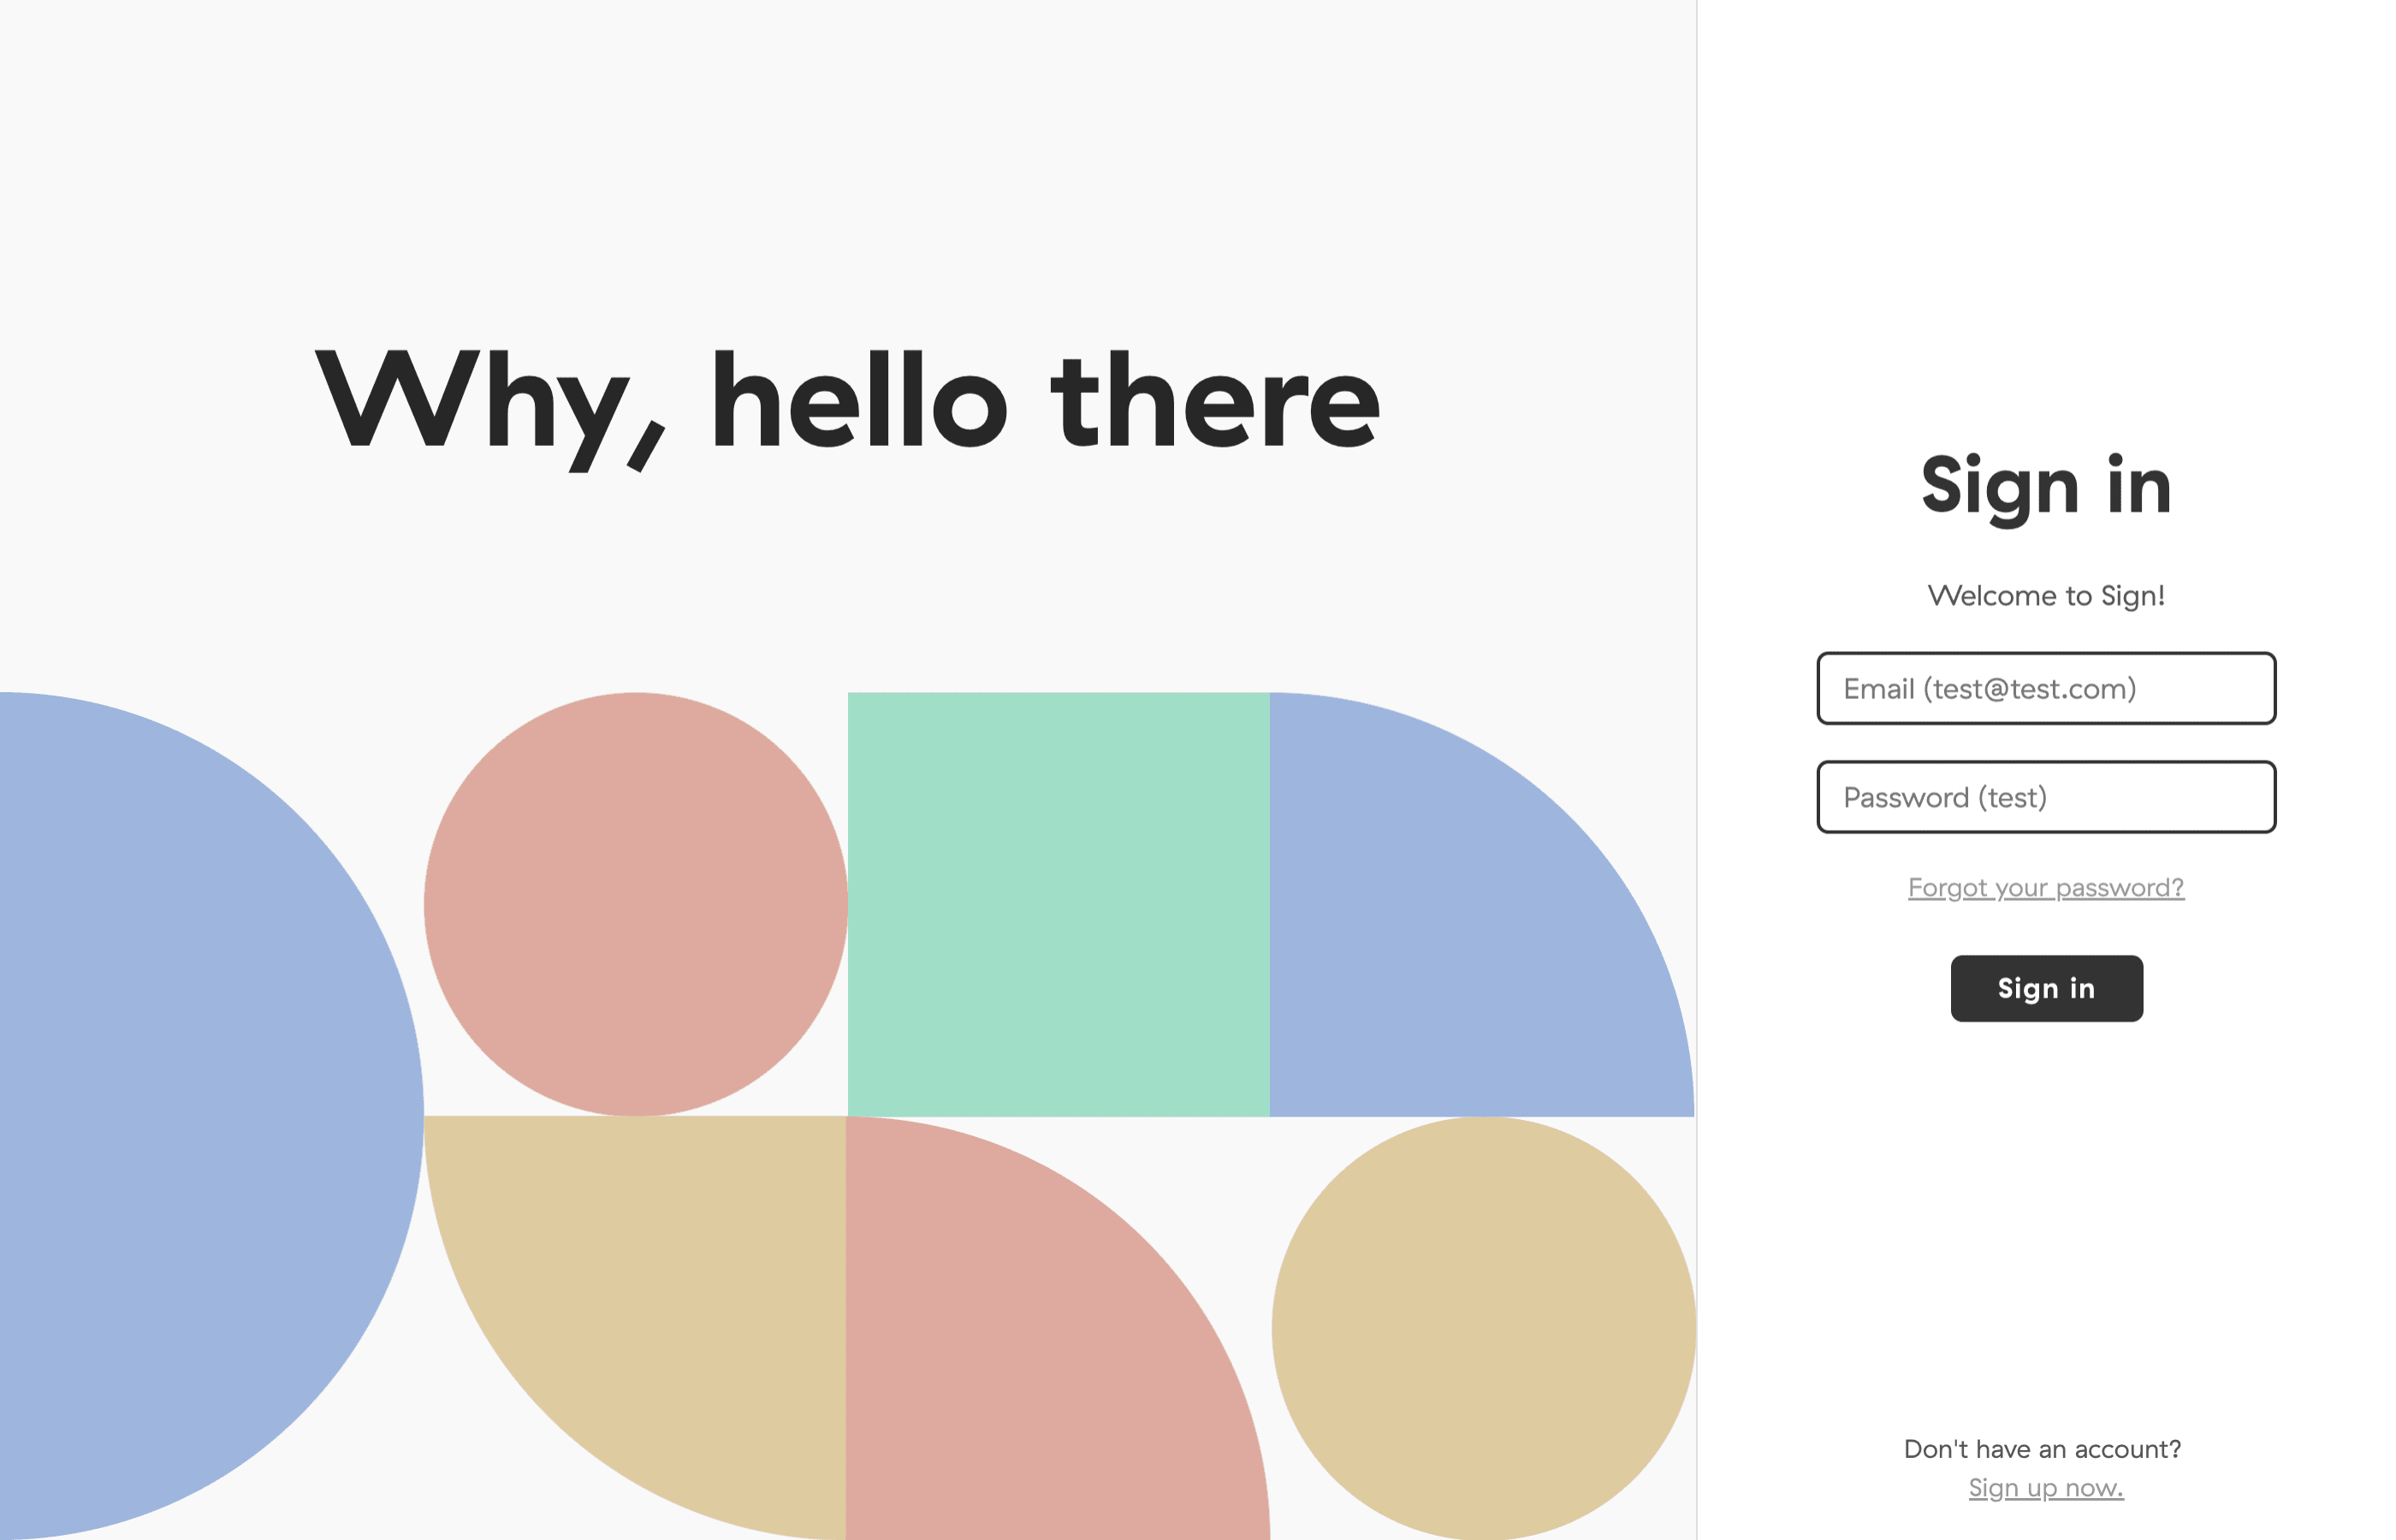 Login page in Sign with colorful shapes